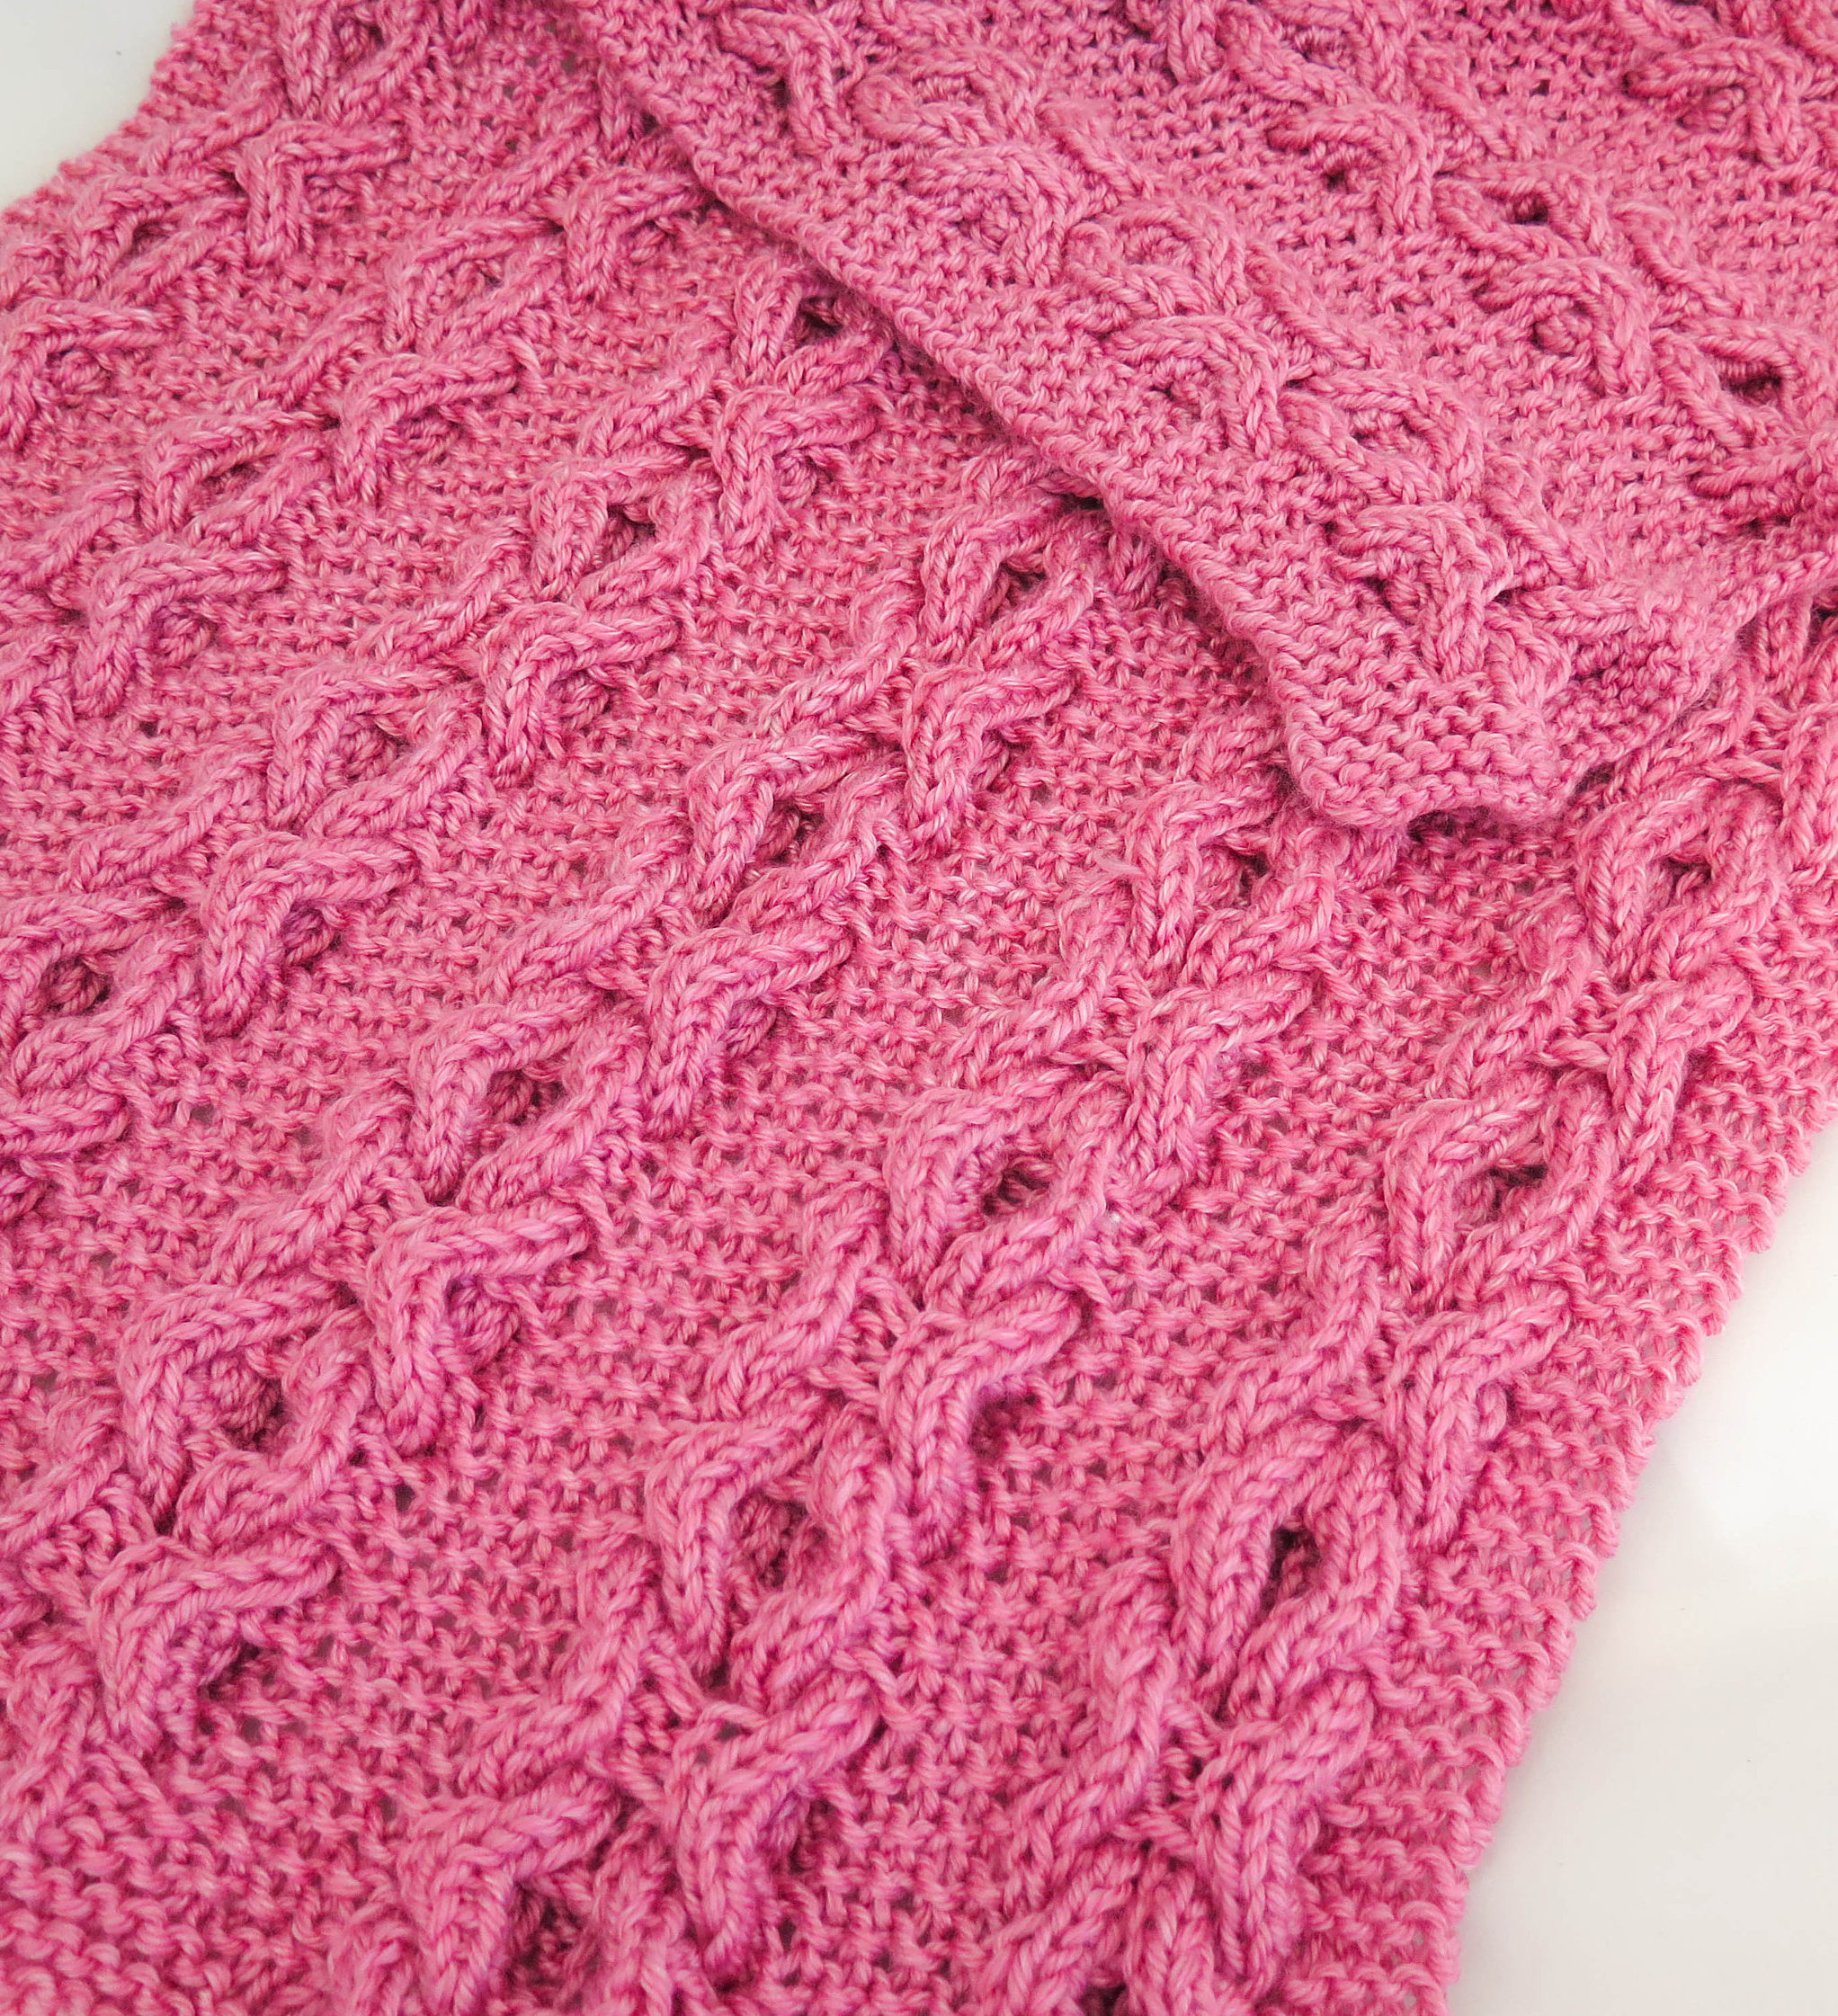 Knitting Pattern for Reversible Hugs and Kisses Cable Blanket